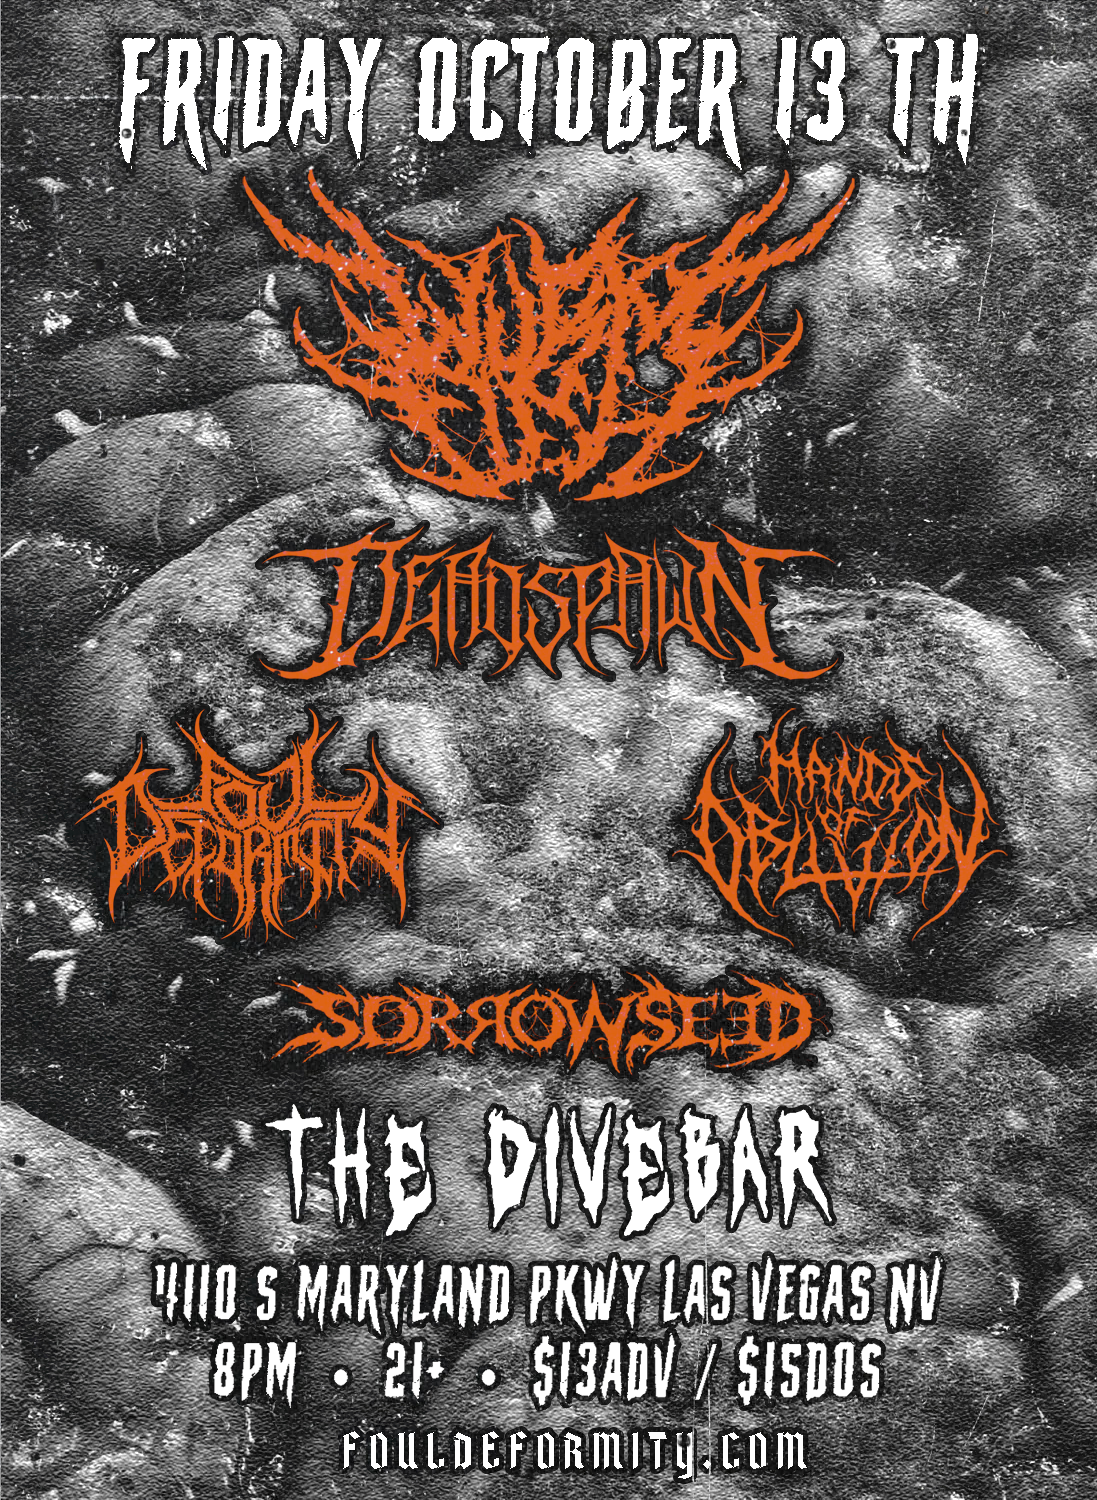 Wurmflesh, Deadspawn, Foul Deformity, and Hands of Oblivion, Friday, October 13th @ The Divebar